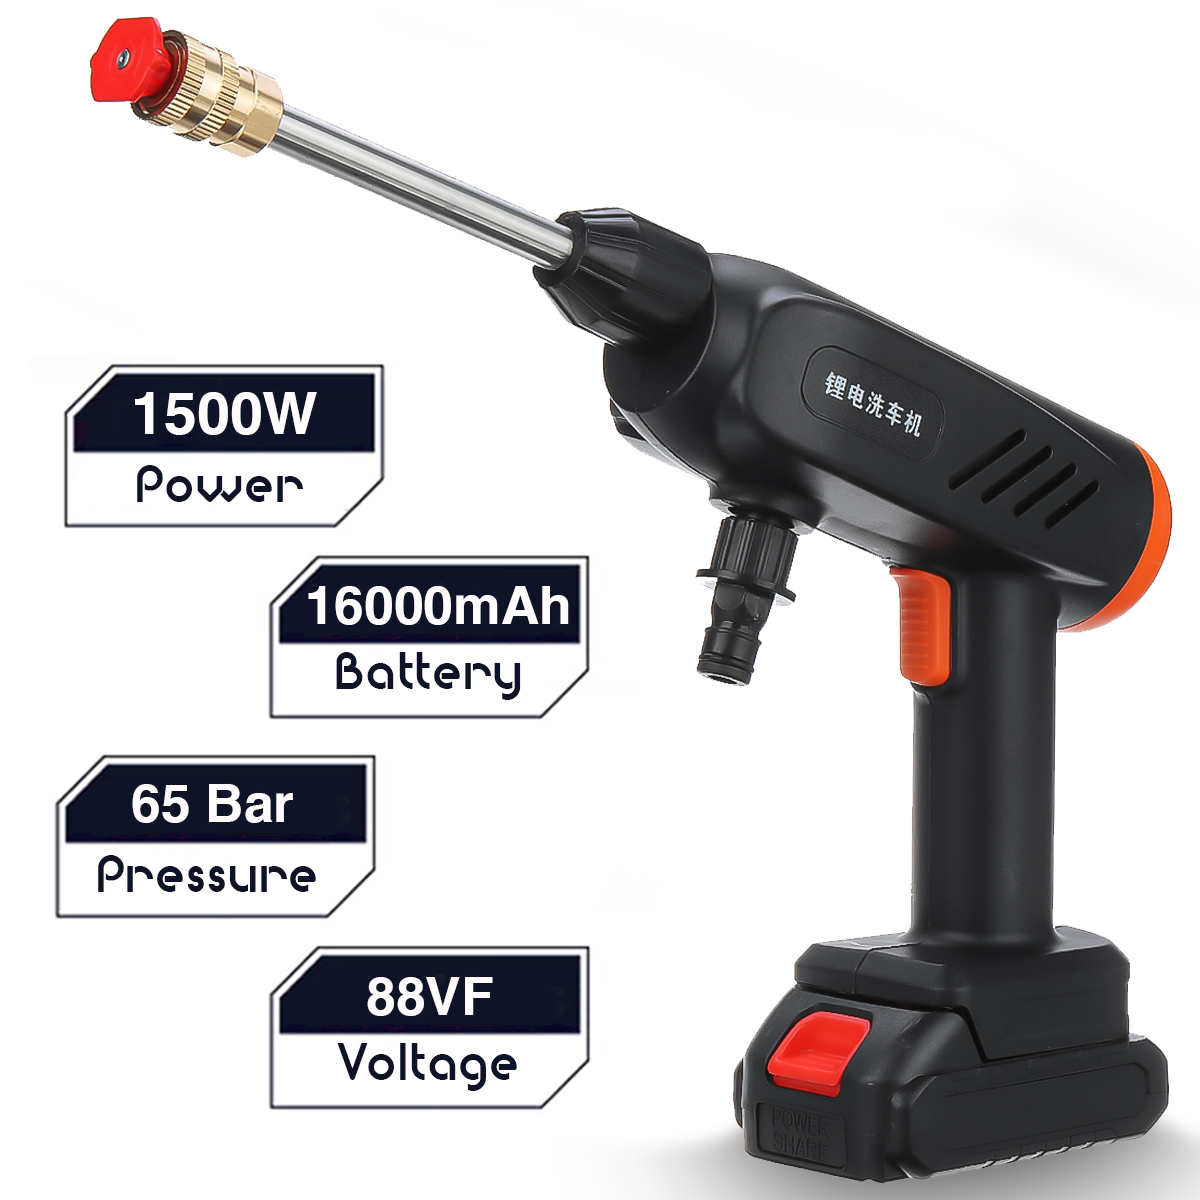 88VF-1500W-Electric-Spray-Guns-Cordless-Rechargeable-Water-Clener-Applicator-Home-Improvement-Craft--1919202-2